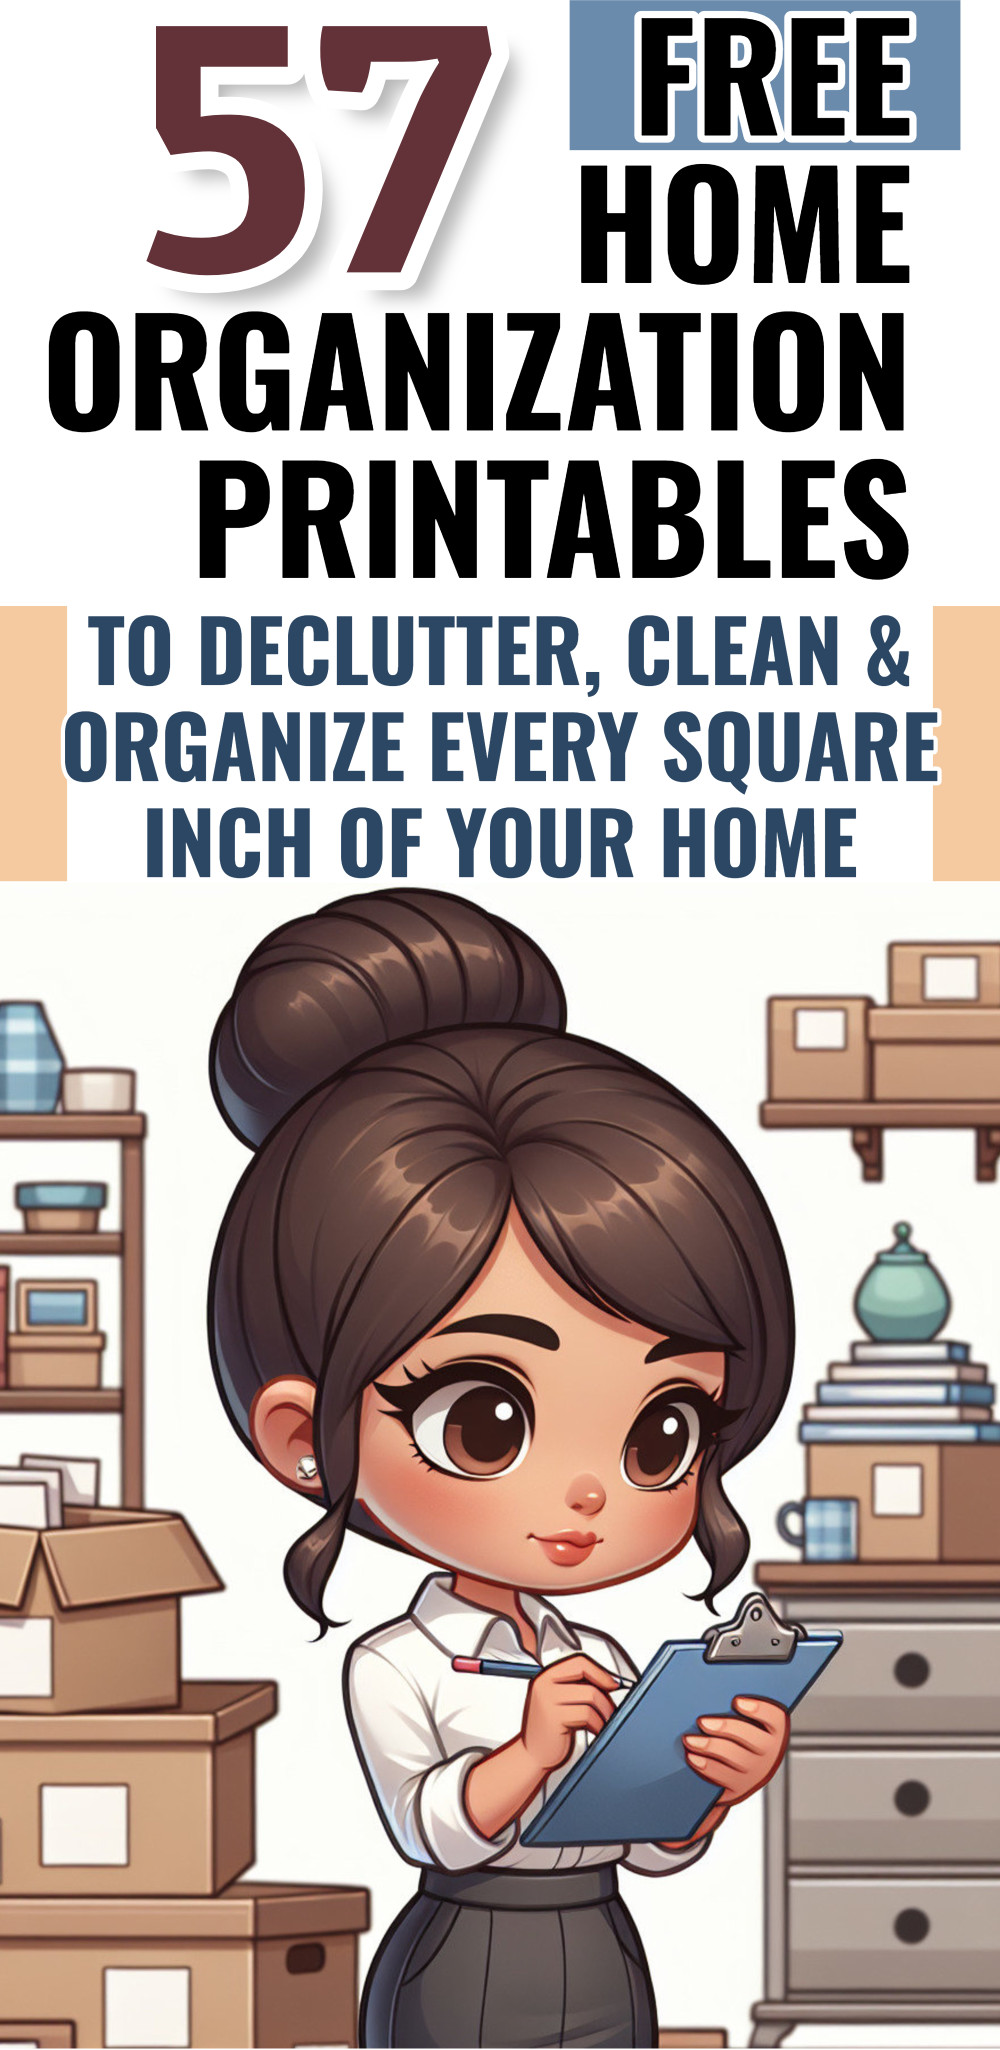 57 free home organization printables to declutter clean organize entire house